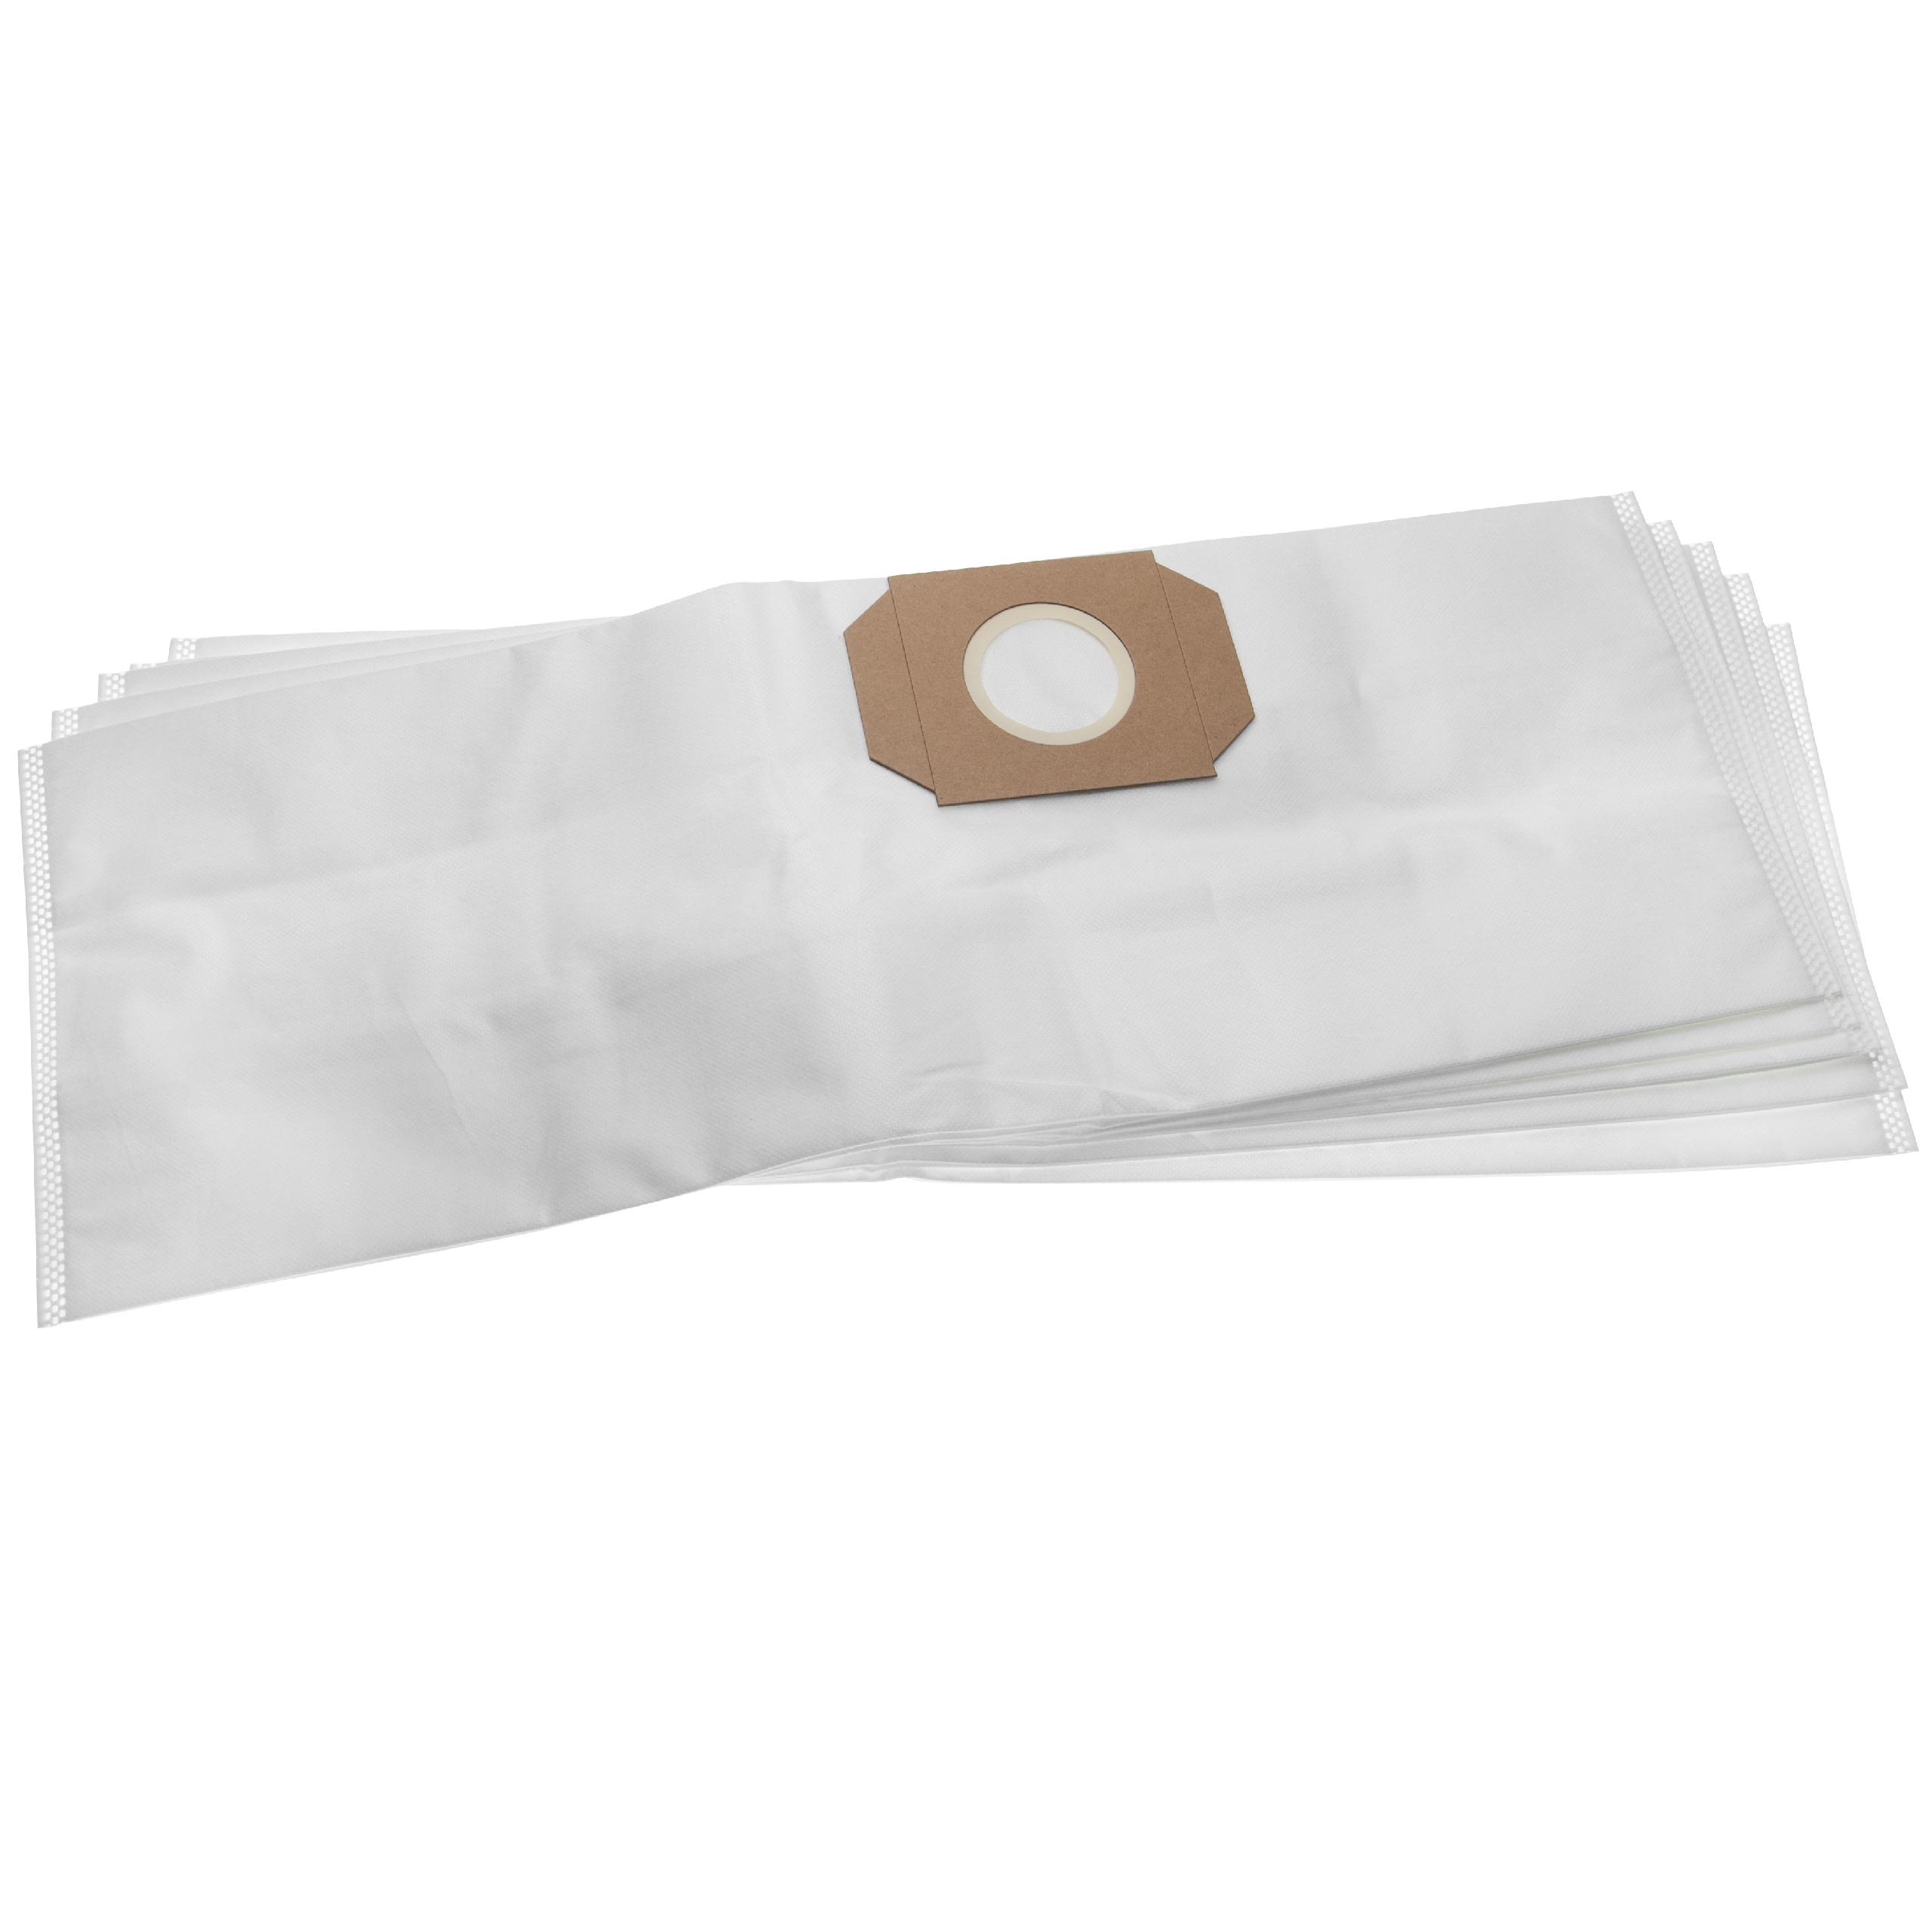 5x Vacuum Cleaner Bag replaces Thomas 201, 787101 for Thomas - microfleece